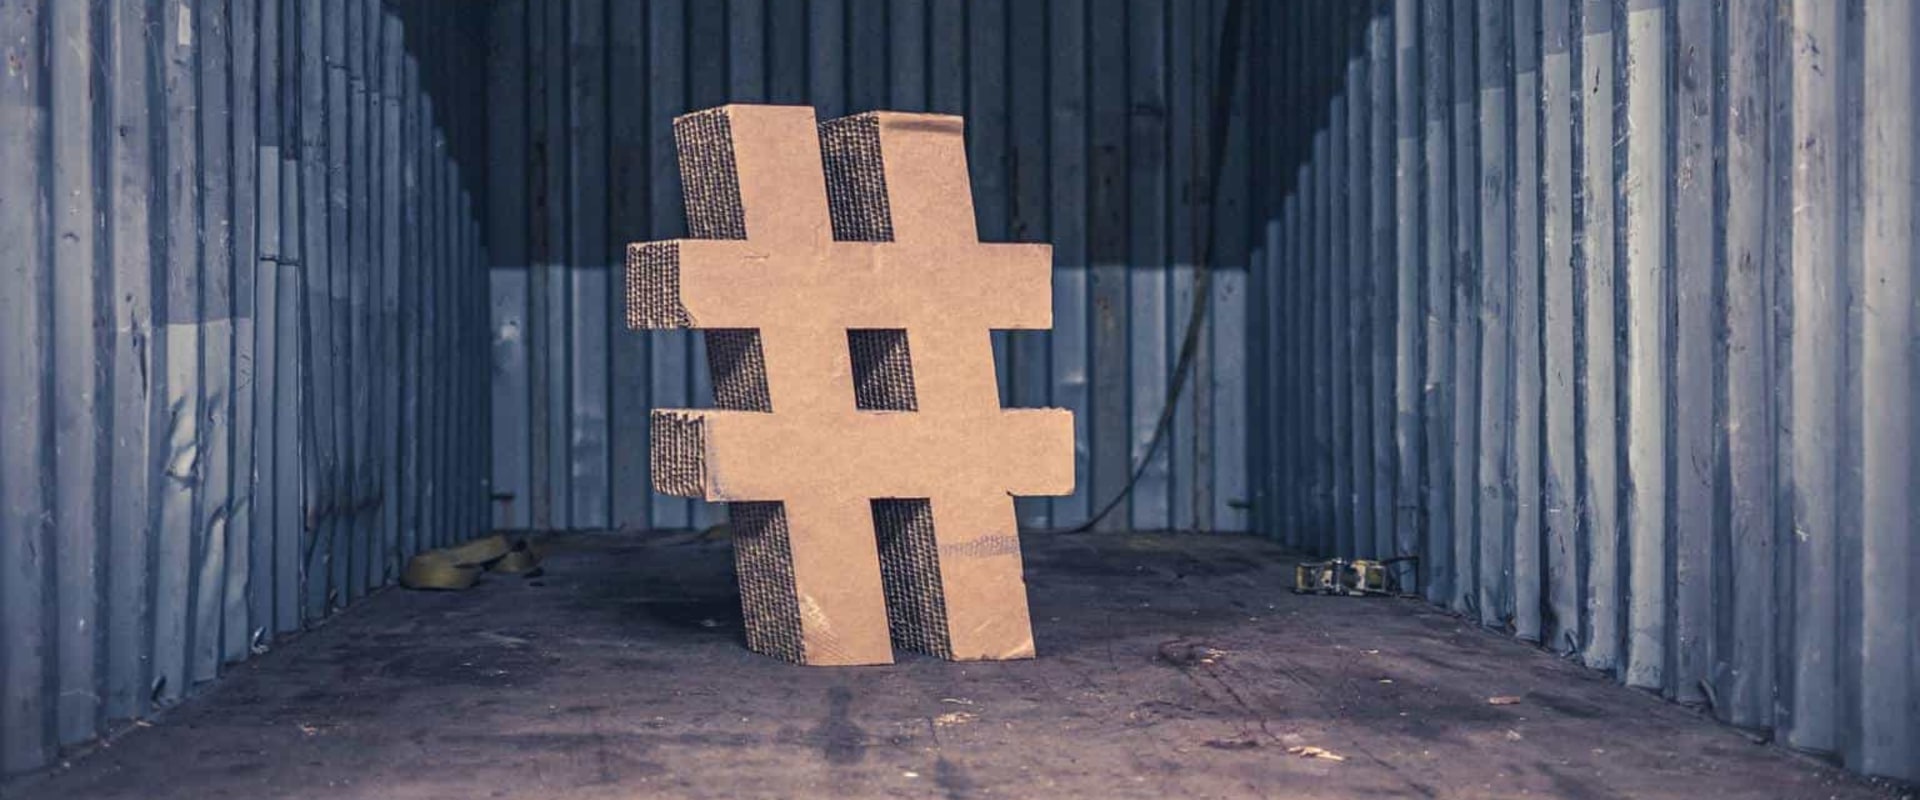 How to Add a Hashtag to an Instagram Post